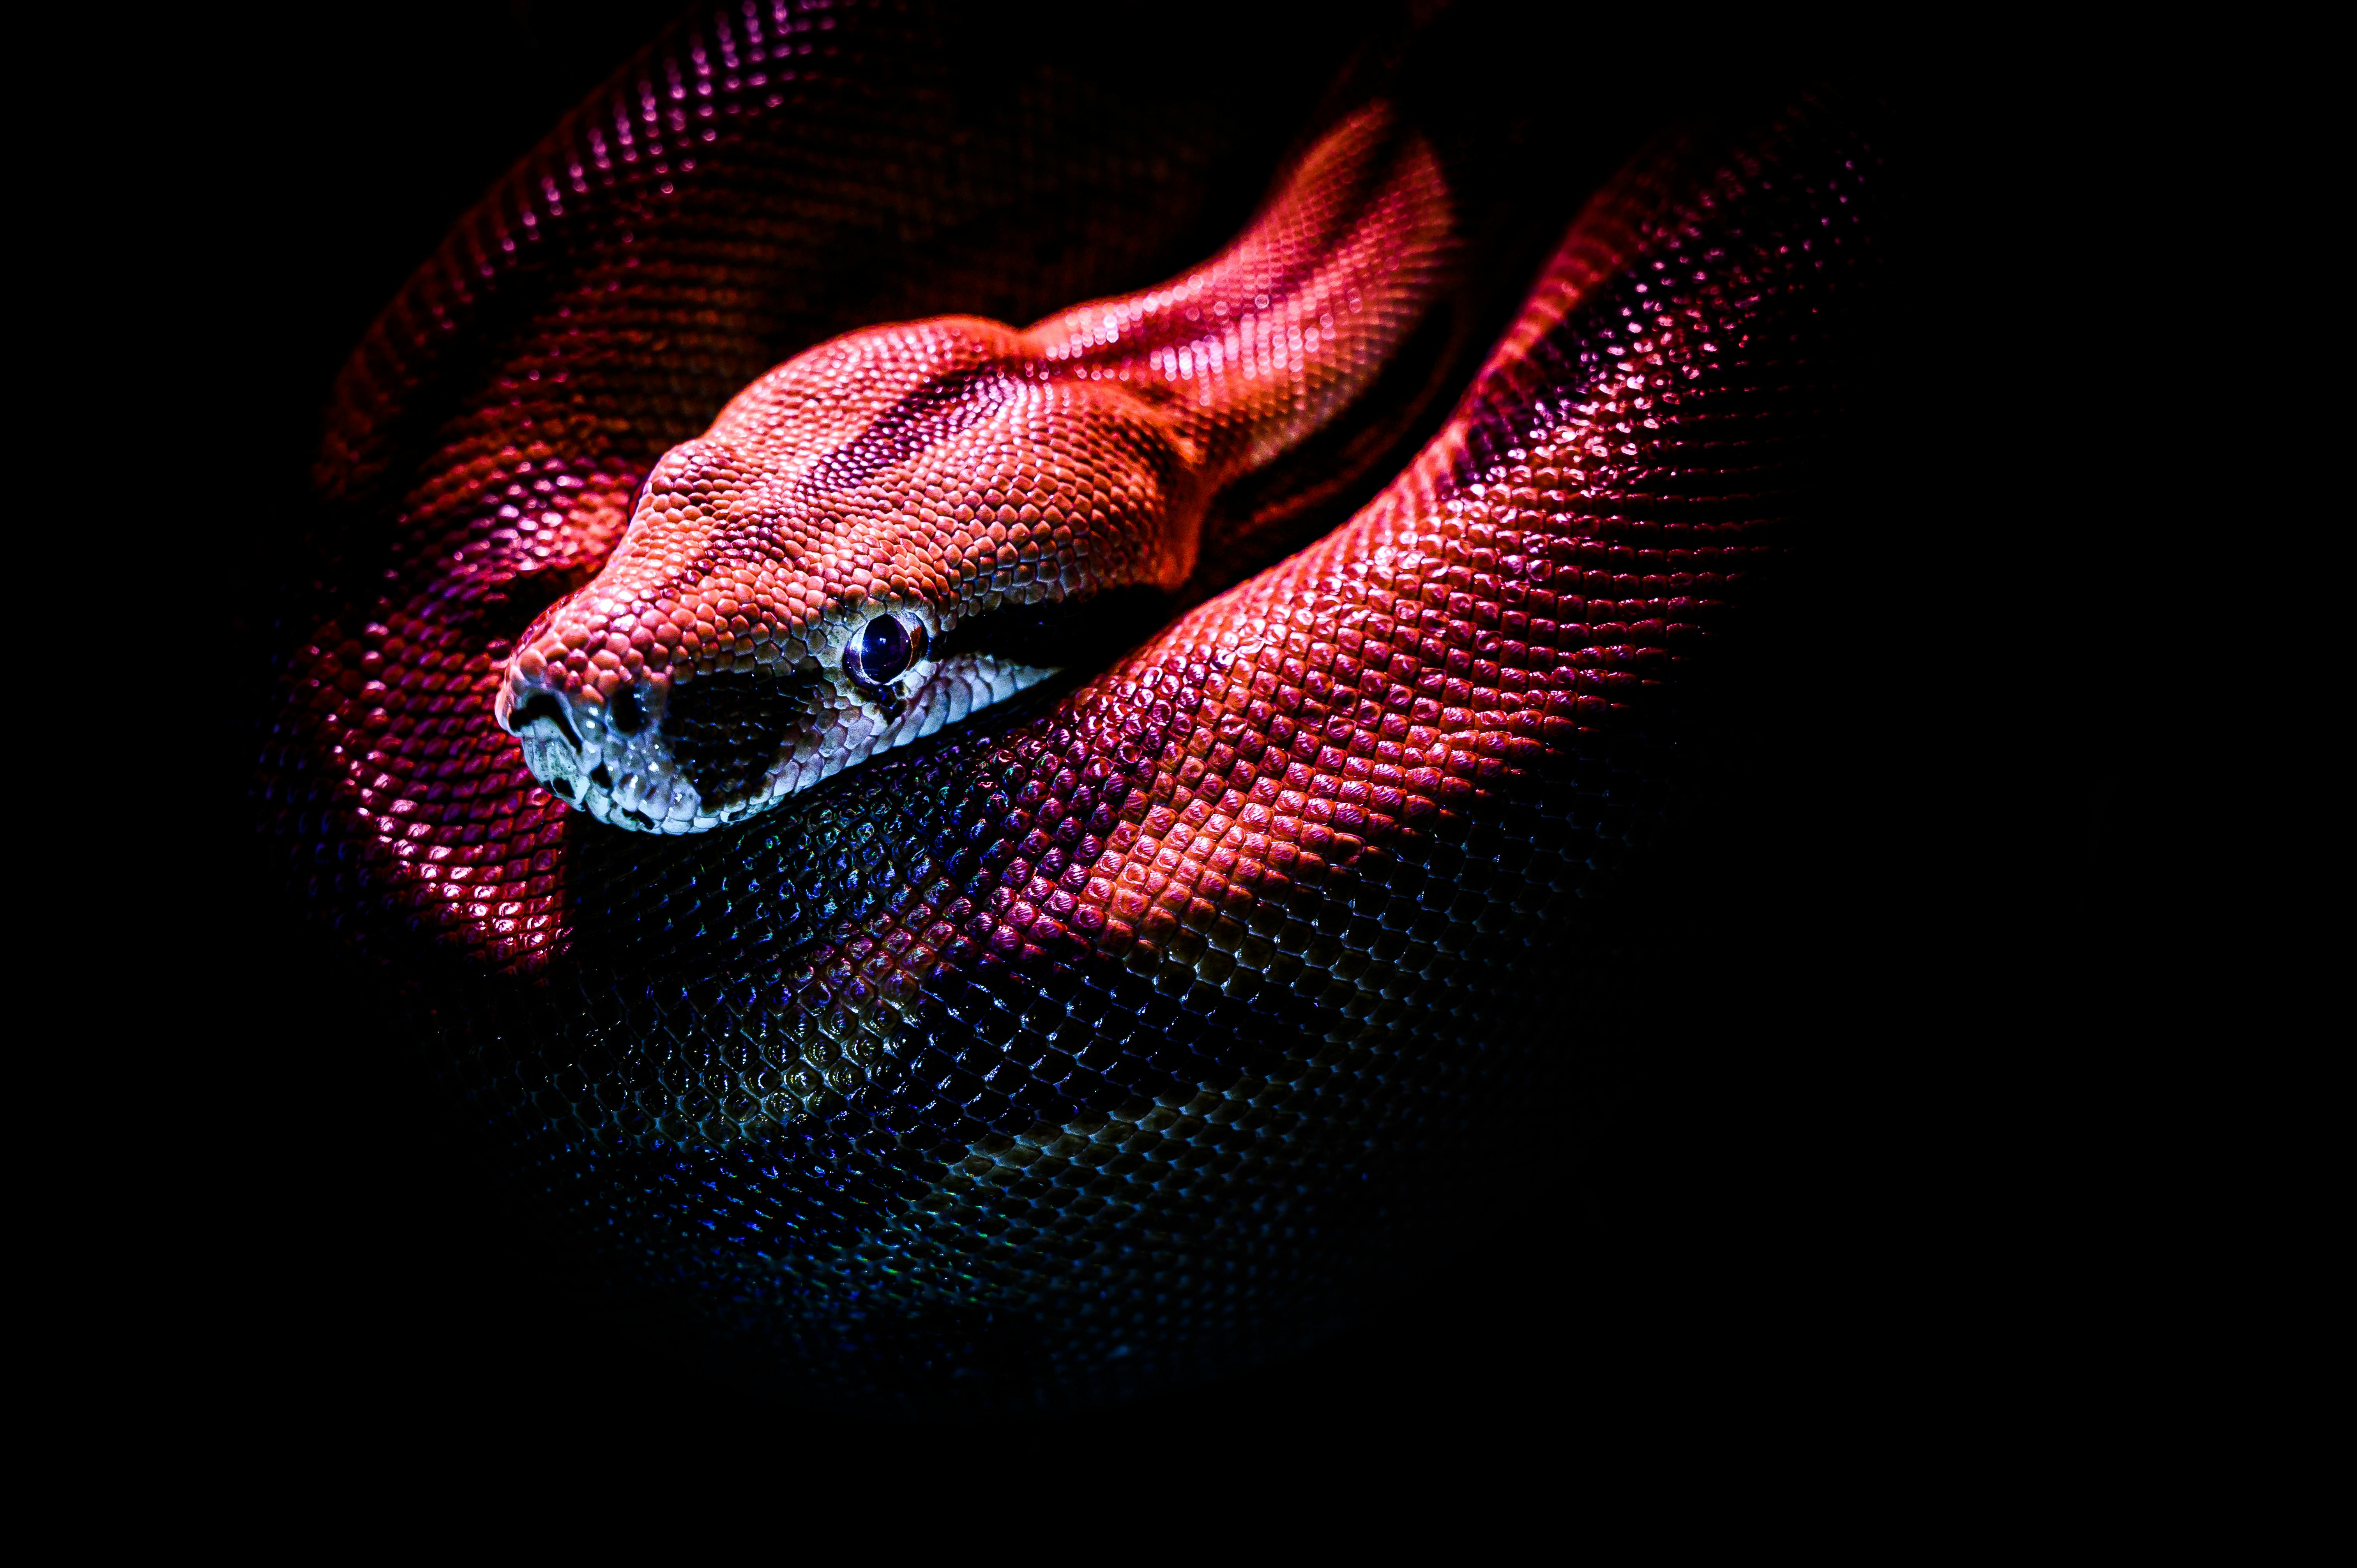 268 Snake 3d Stock Photos - Free & Royalty-Free Stock Photos from Dreamstime